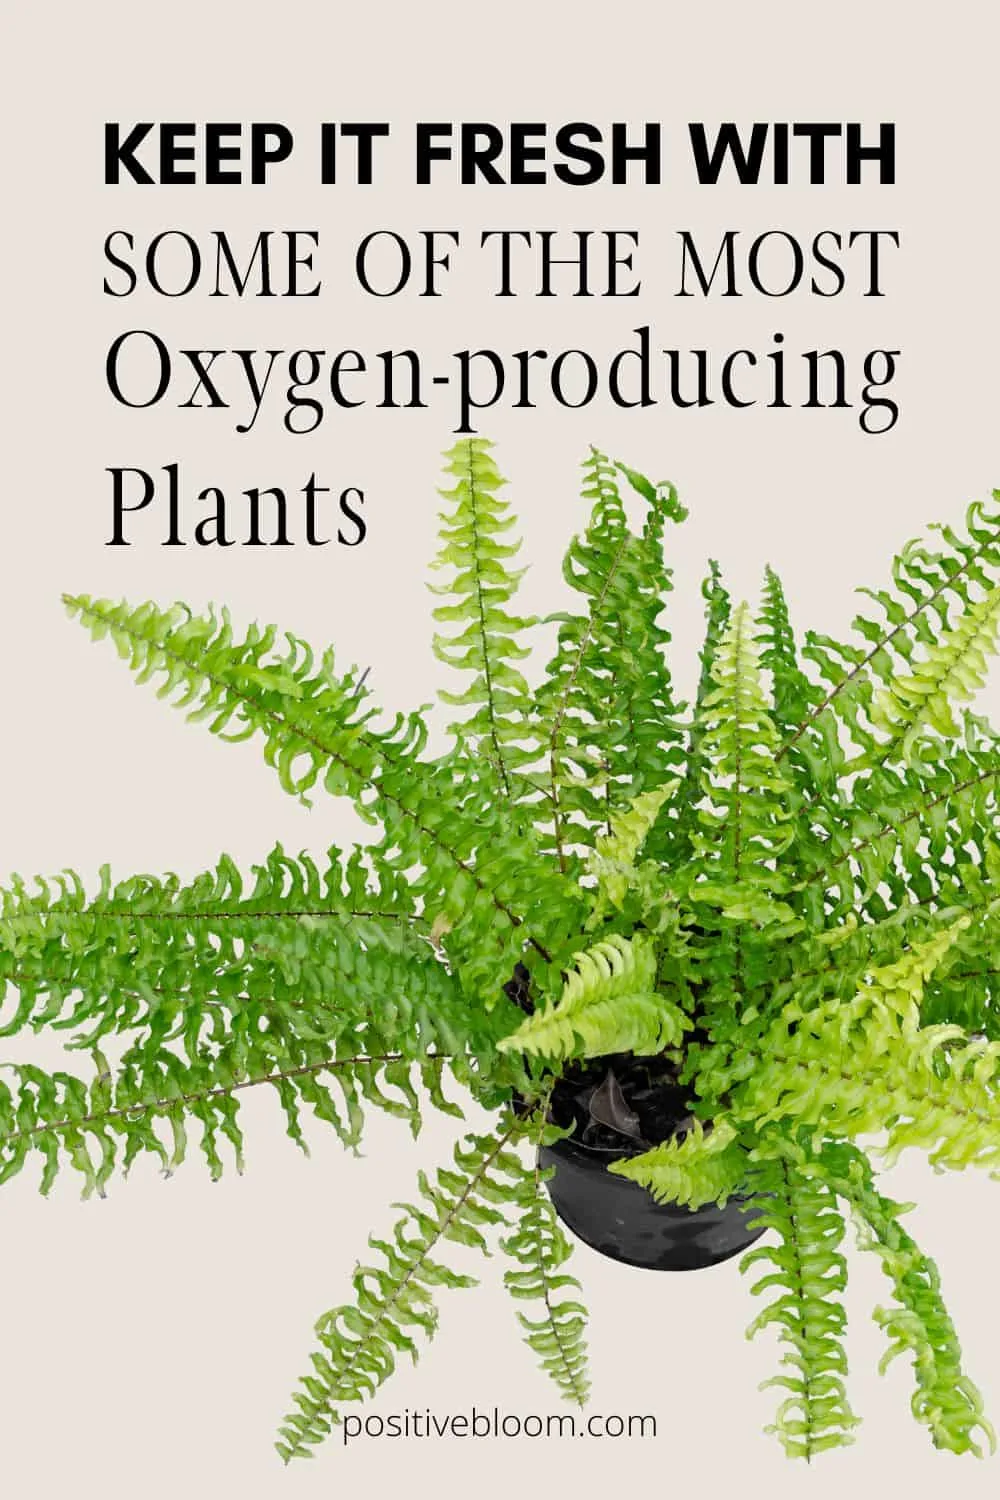 Keep It Fresh With Some Of The Most Oxygen-producing Plants Pinterest